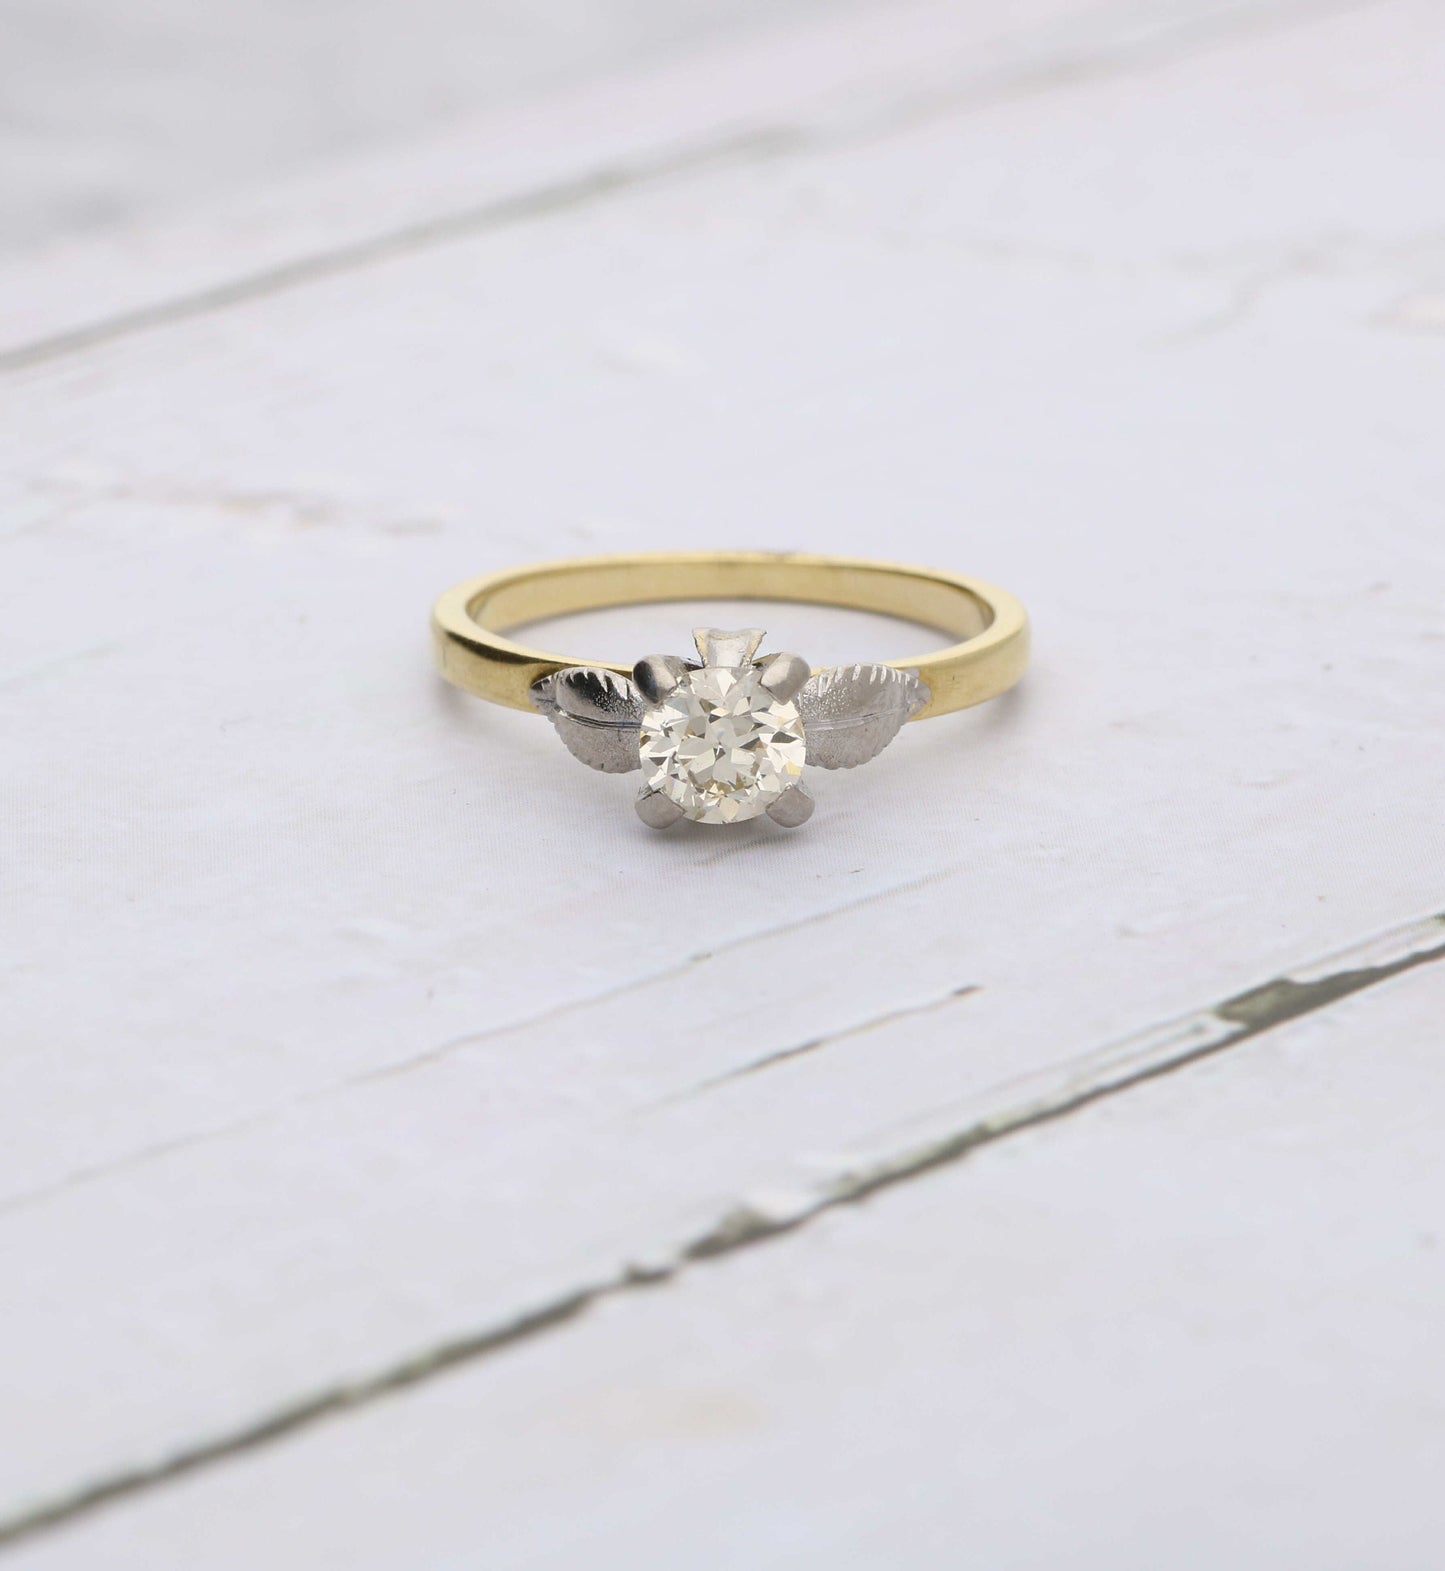 Vintage 0.50ct diamond solitaire engagement ring